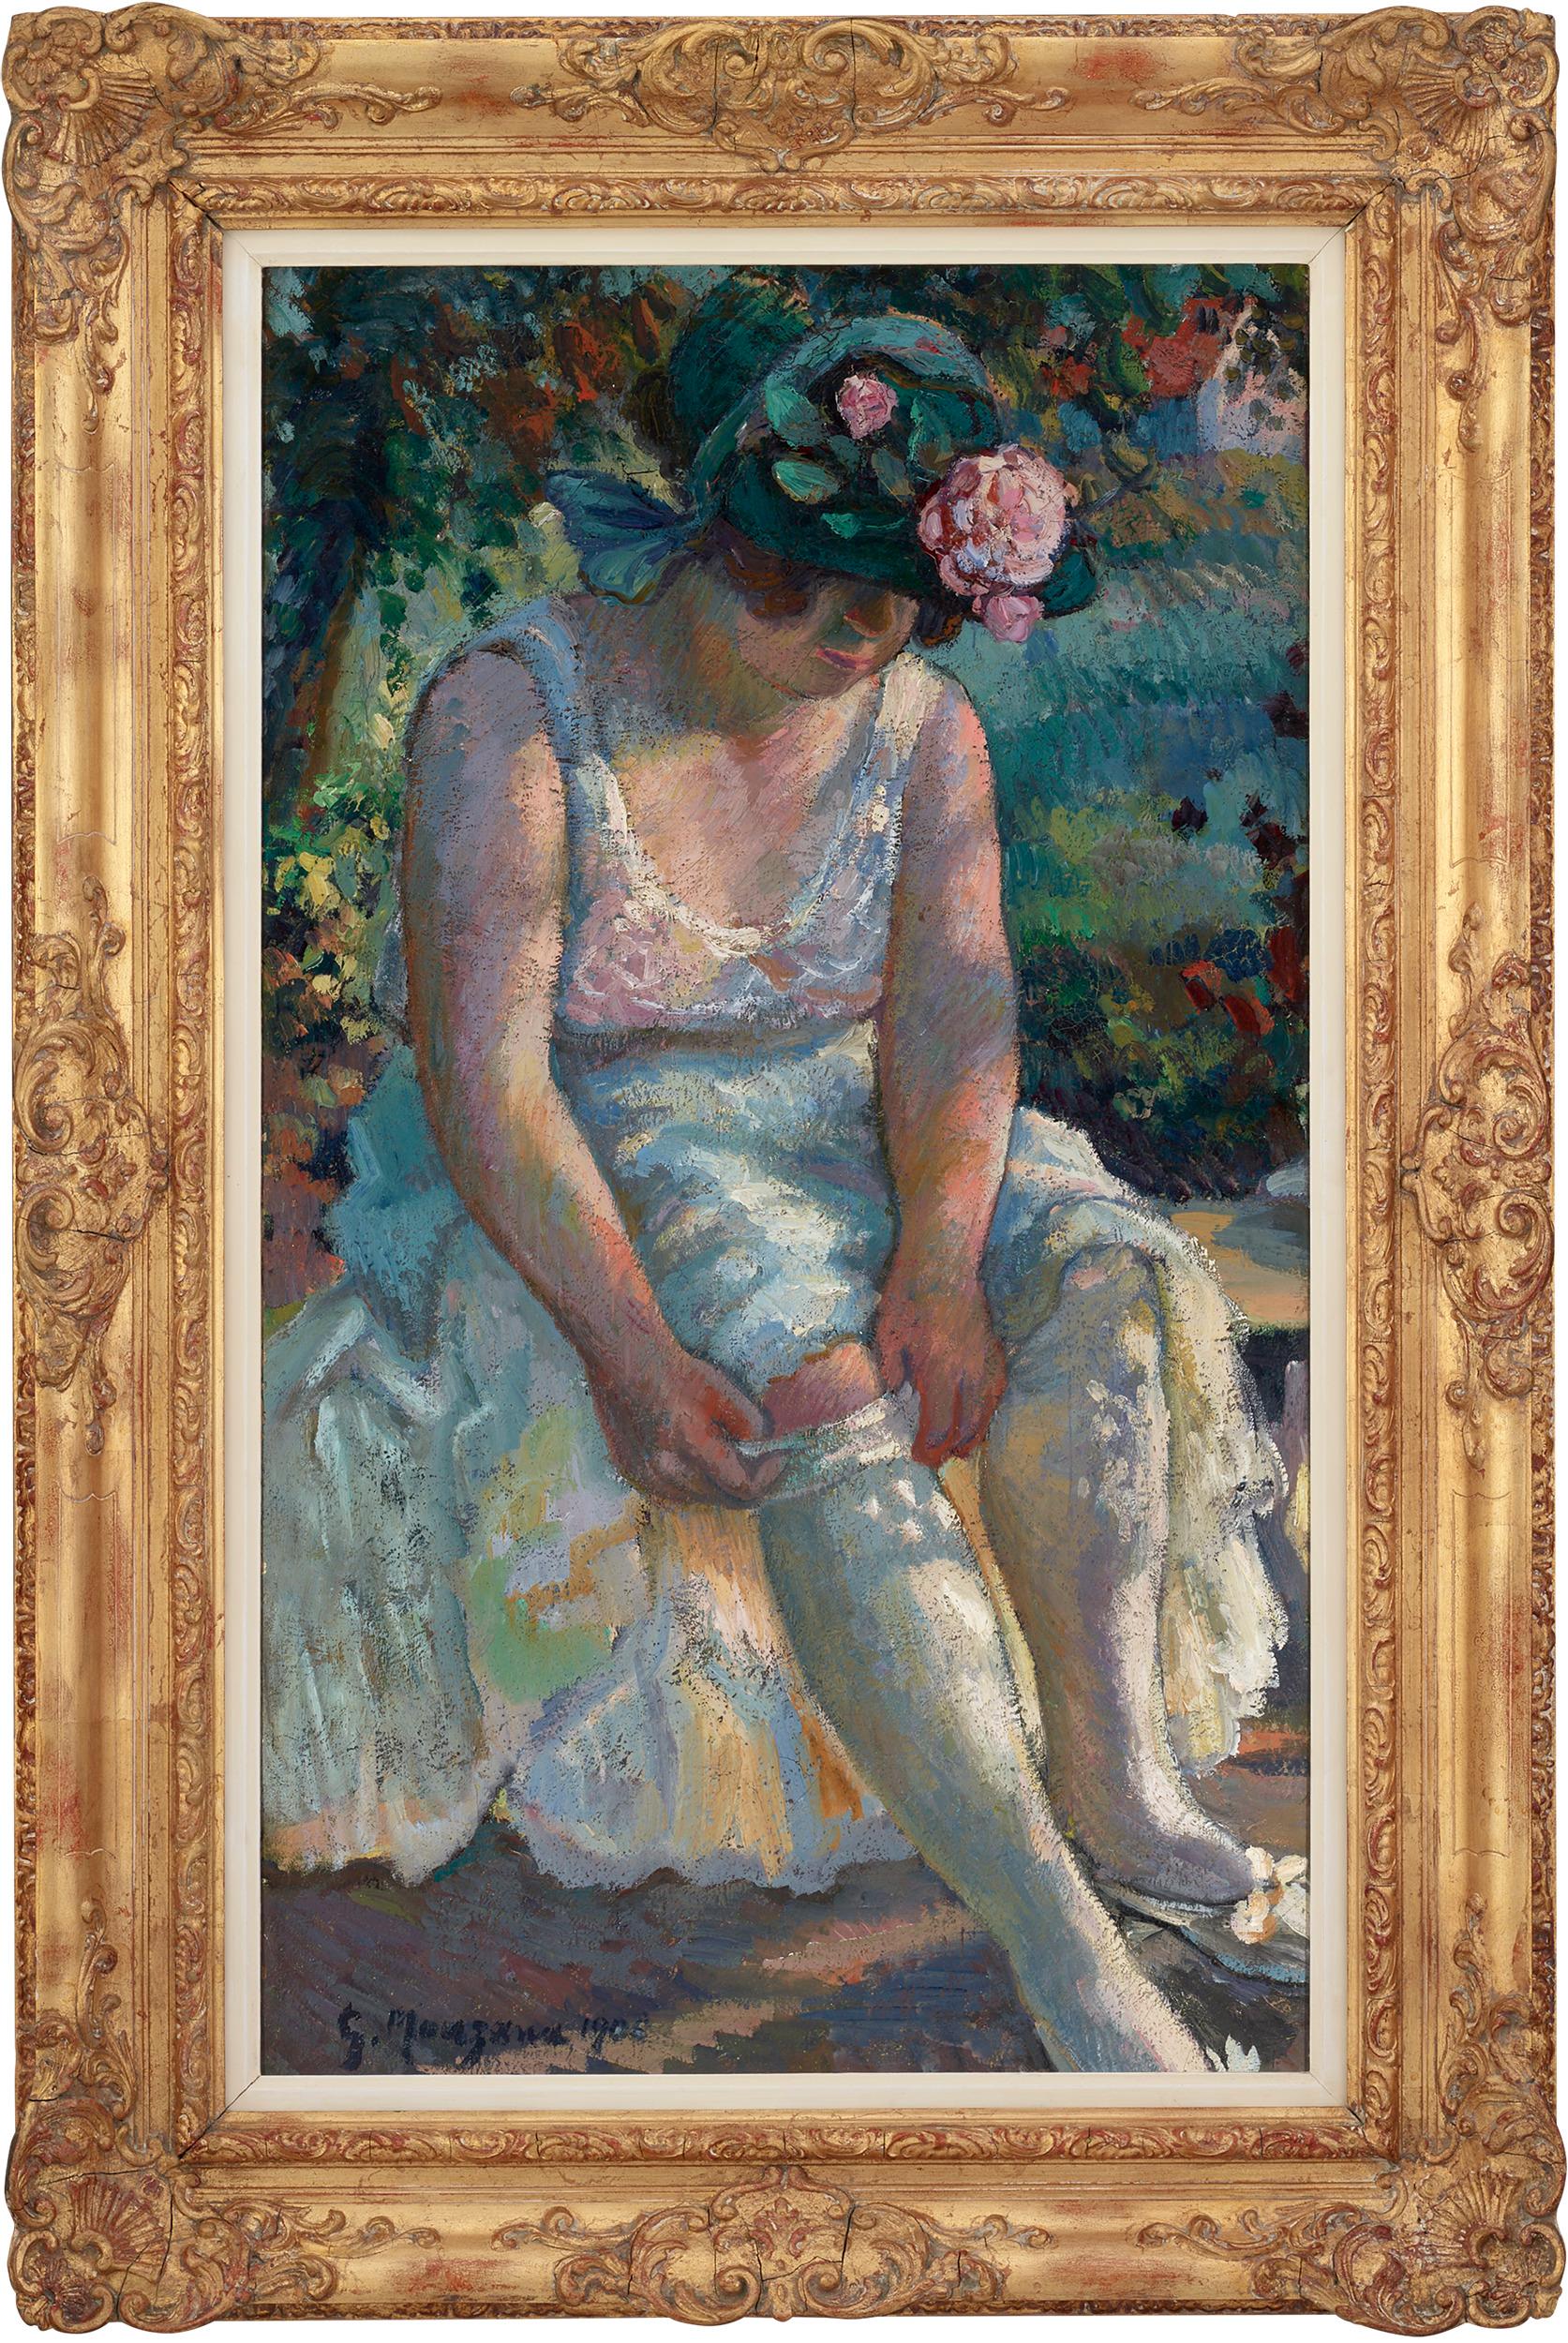 A woman dons her stocking in this Post-Impressionist oil on canvas by the French painter Georges Manzana Pissarro. The work represents an important turning point in the style of the artist; it is the very first composition in which he captures a